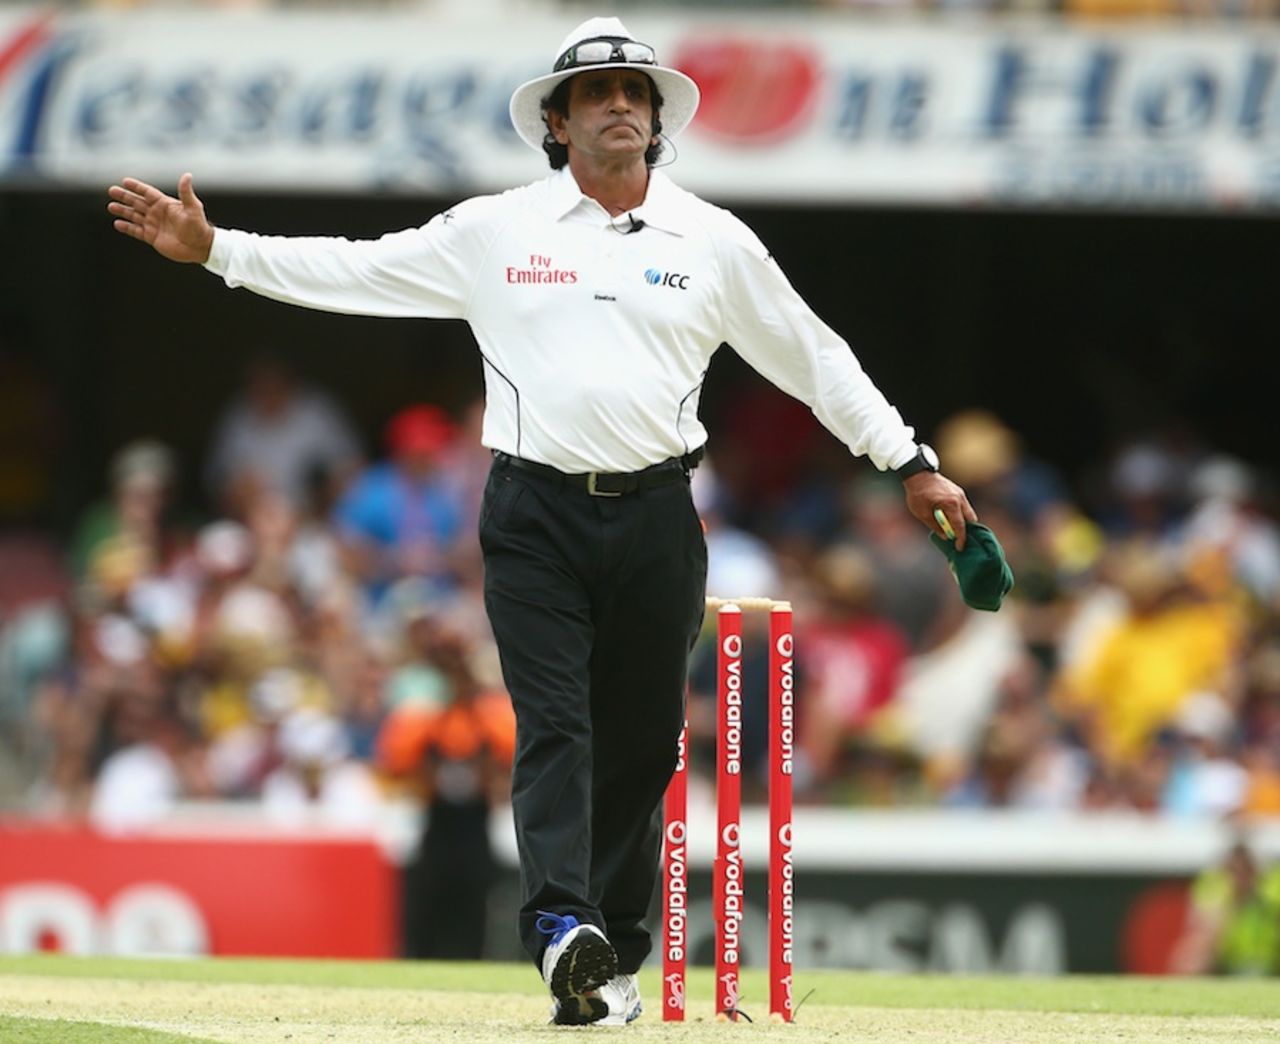 Asad Rauf signals no-ball after consulting with the third umpire, reprieving Jacques Kallis, Australia v South Africa, 1st Test, Brisbane, 1st day, November 9, 2012